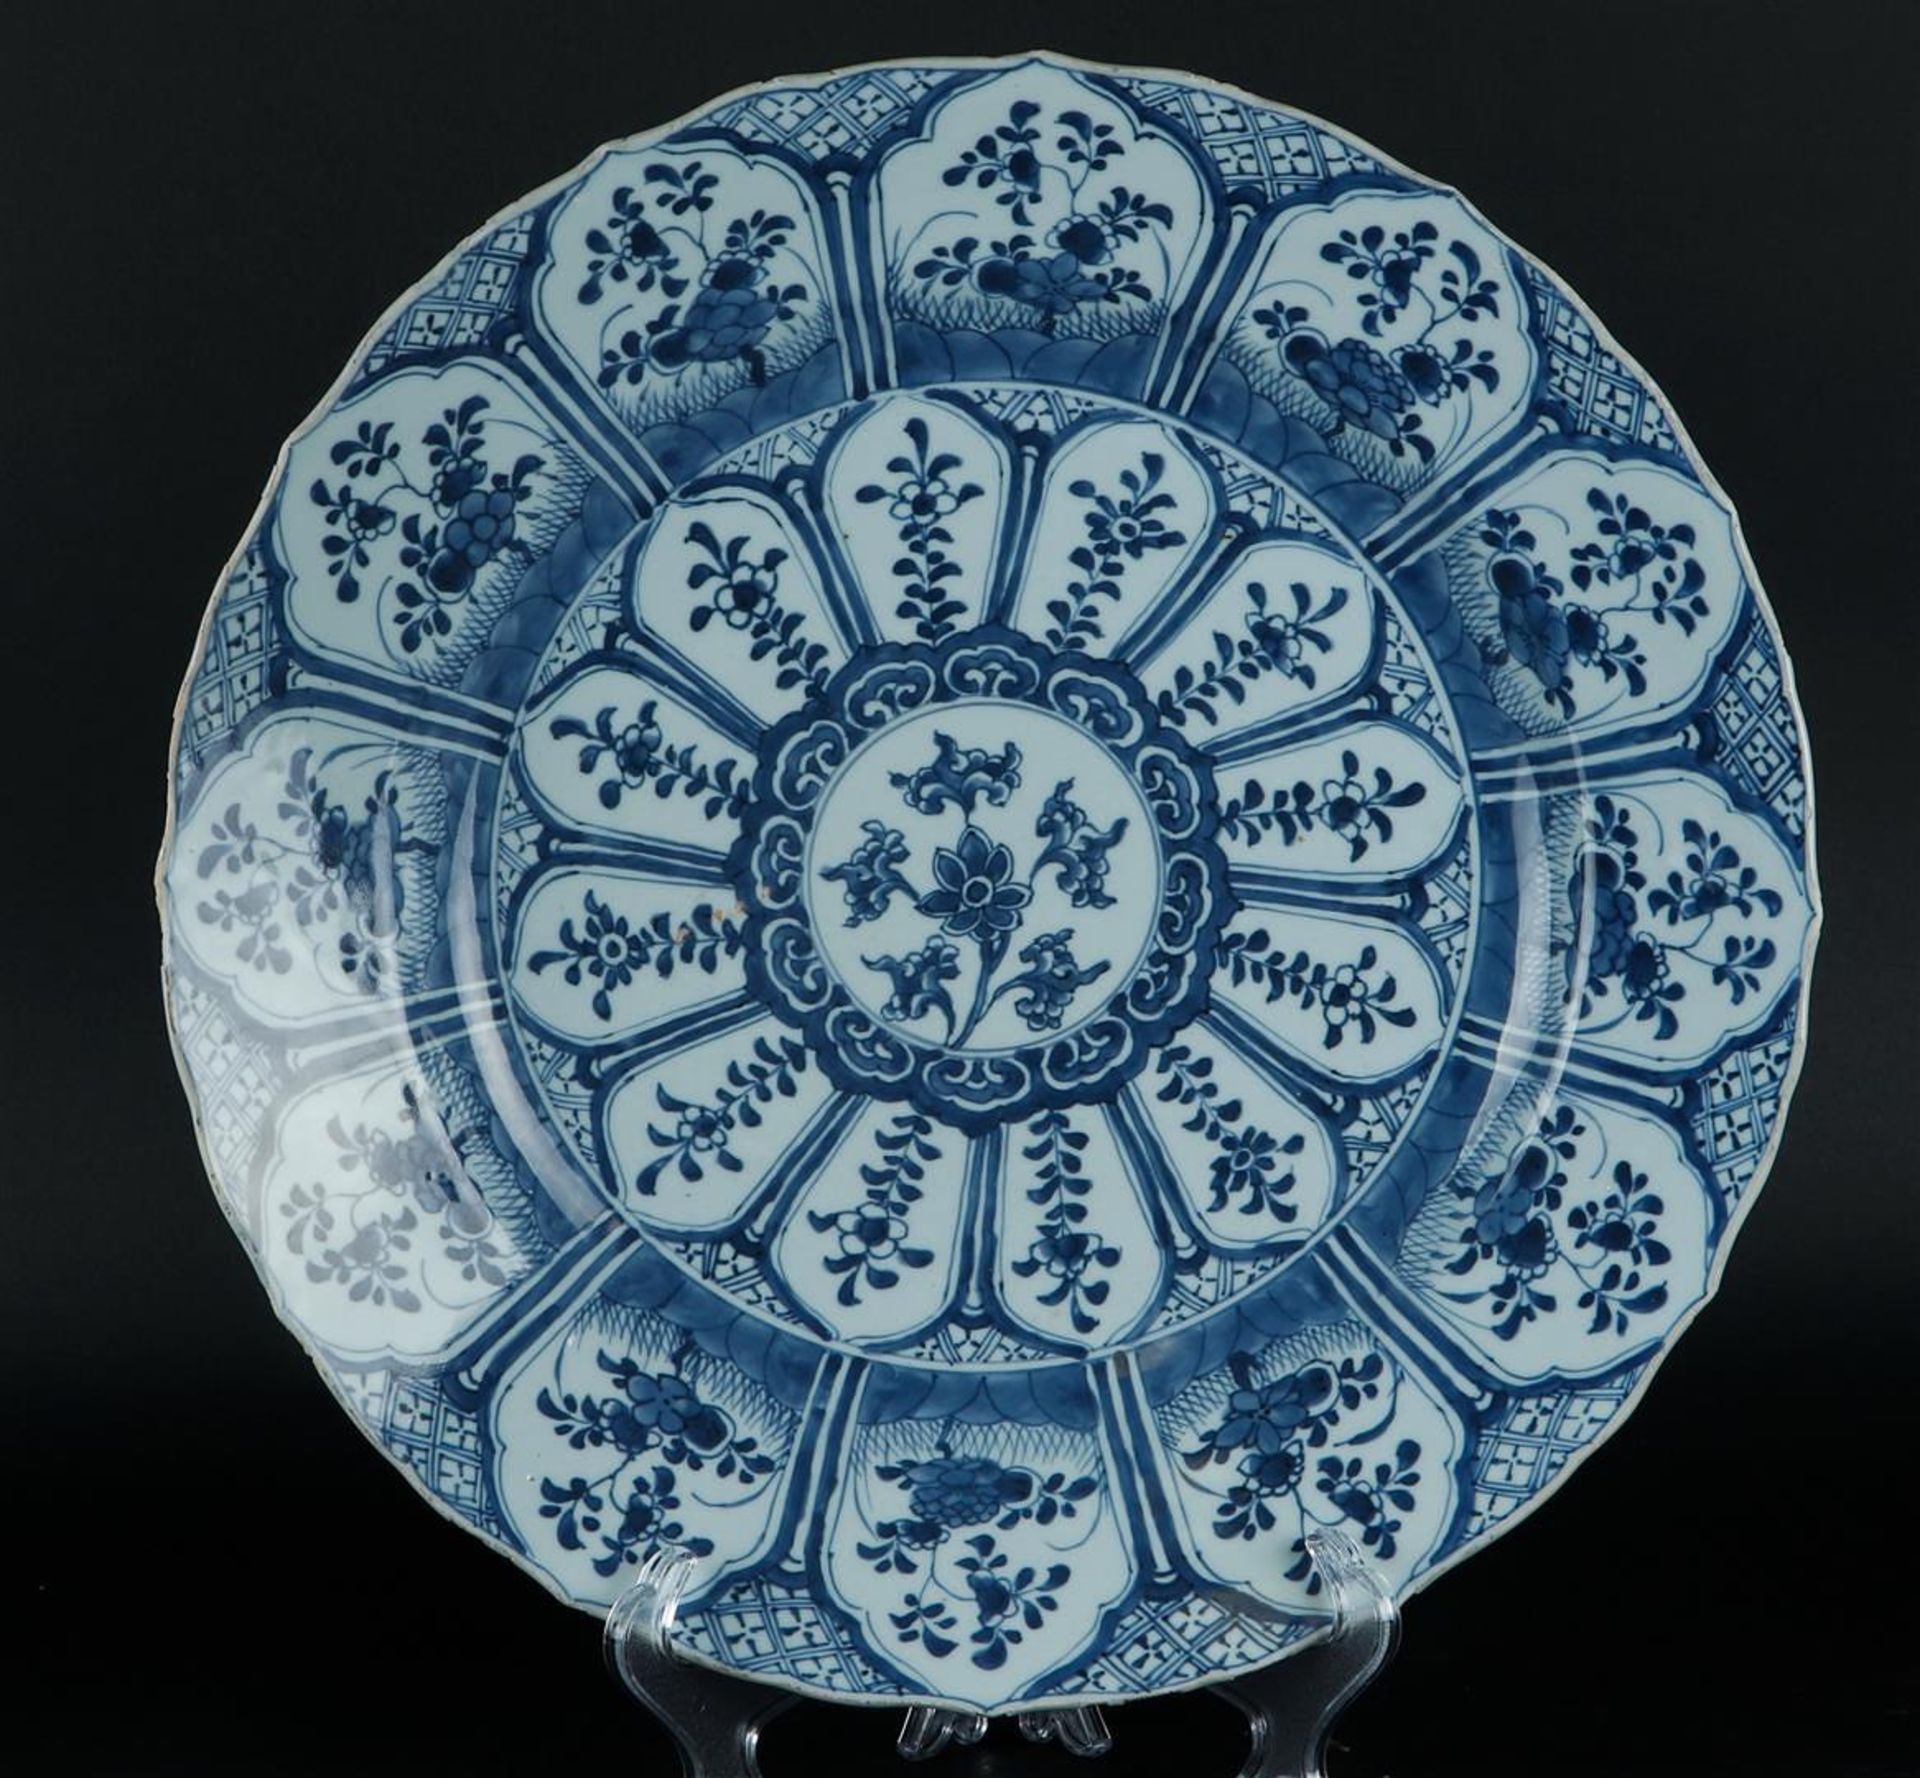 A porcelain dish, so-called lotus dish with lotus leaf-shaped beds in the outer rim with floral deco